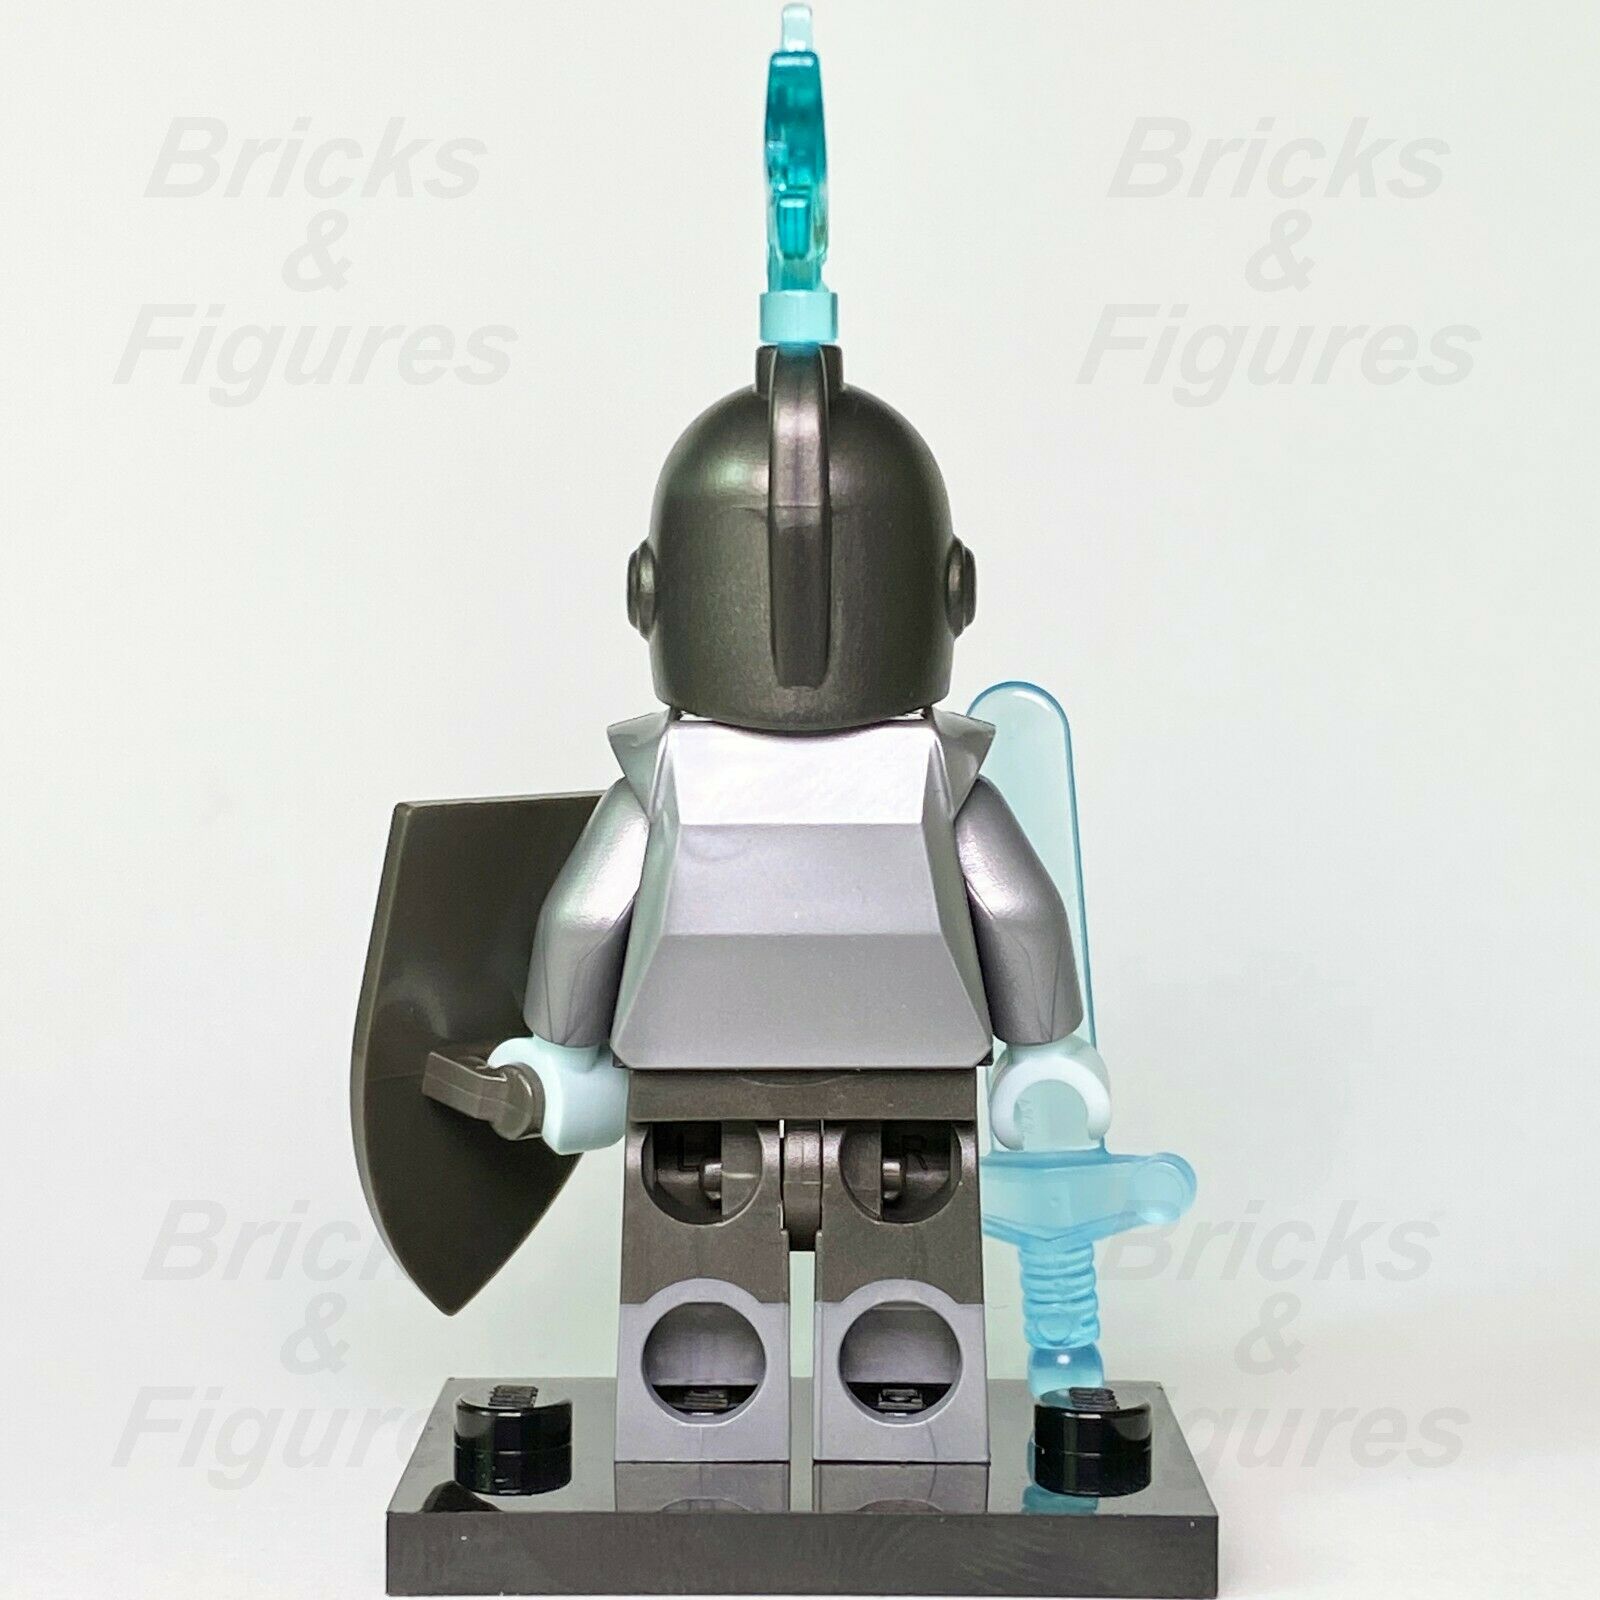 LEGO Collectible Minifigures Fright Knight Sword & Shield Series 19 71025 - Bricks & Figures